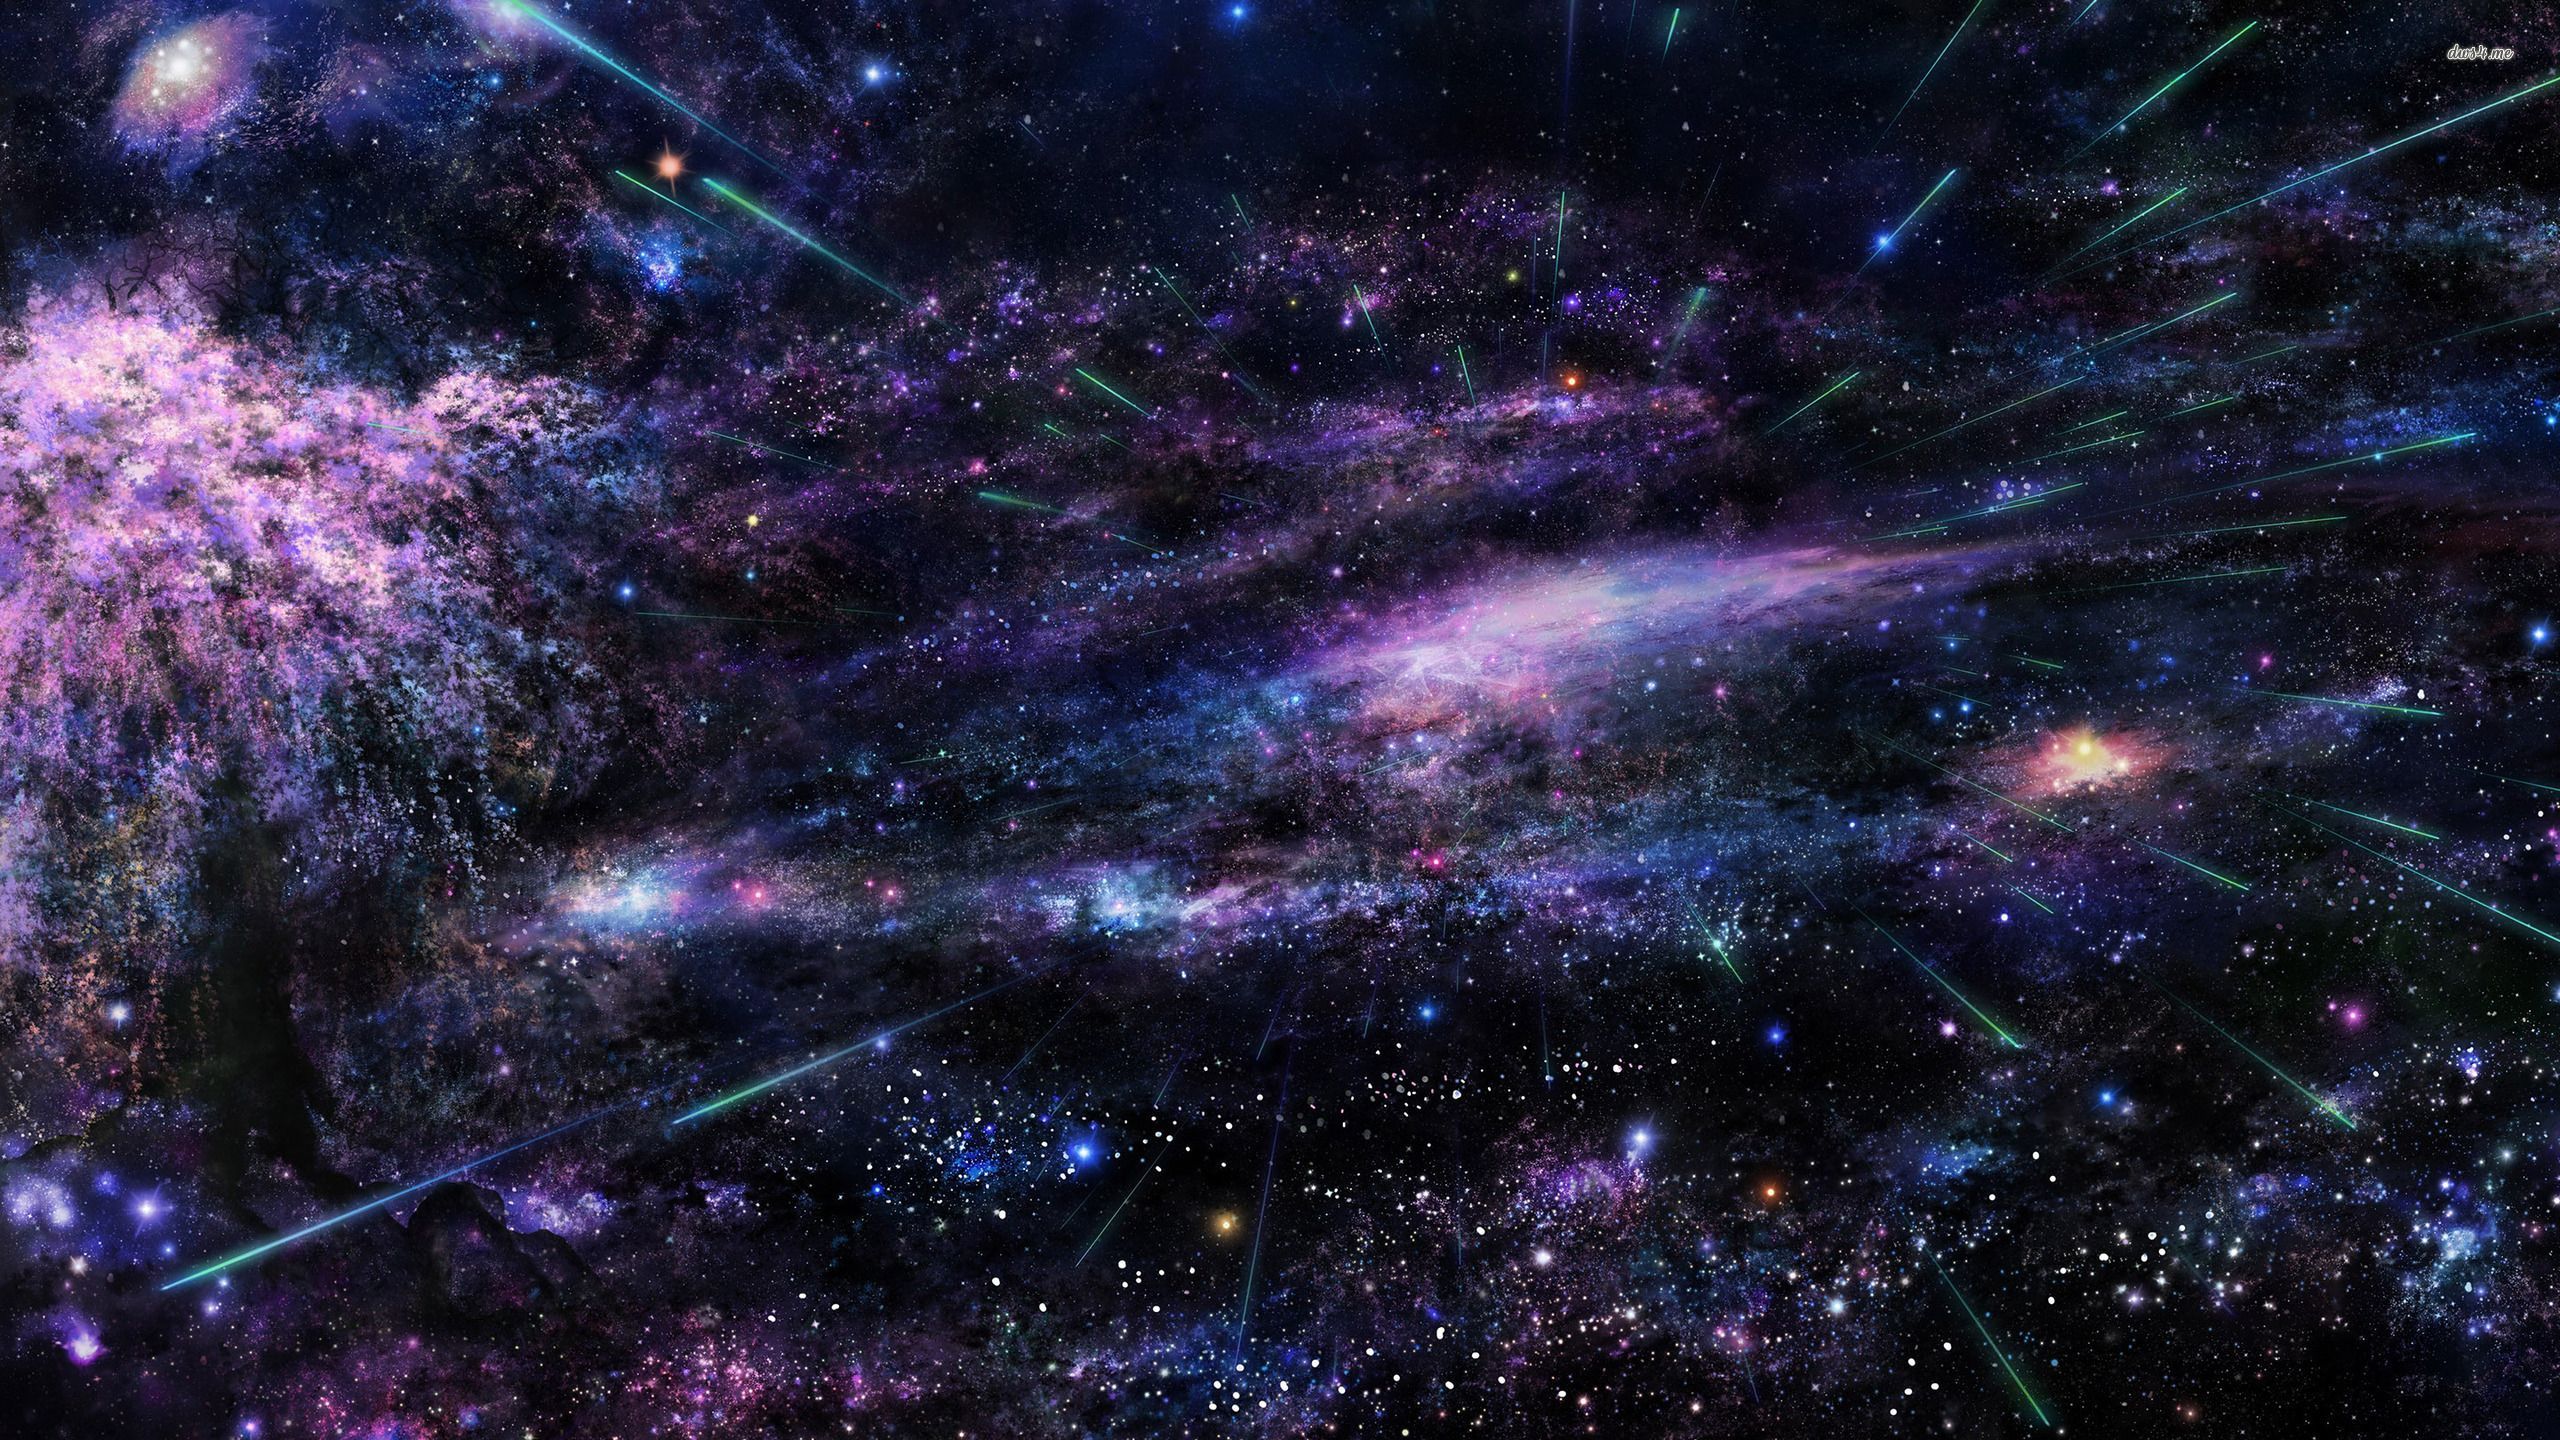 Universe wallpaper - Space wallpapers -